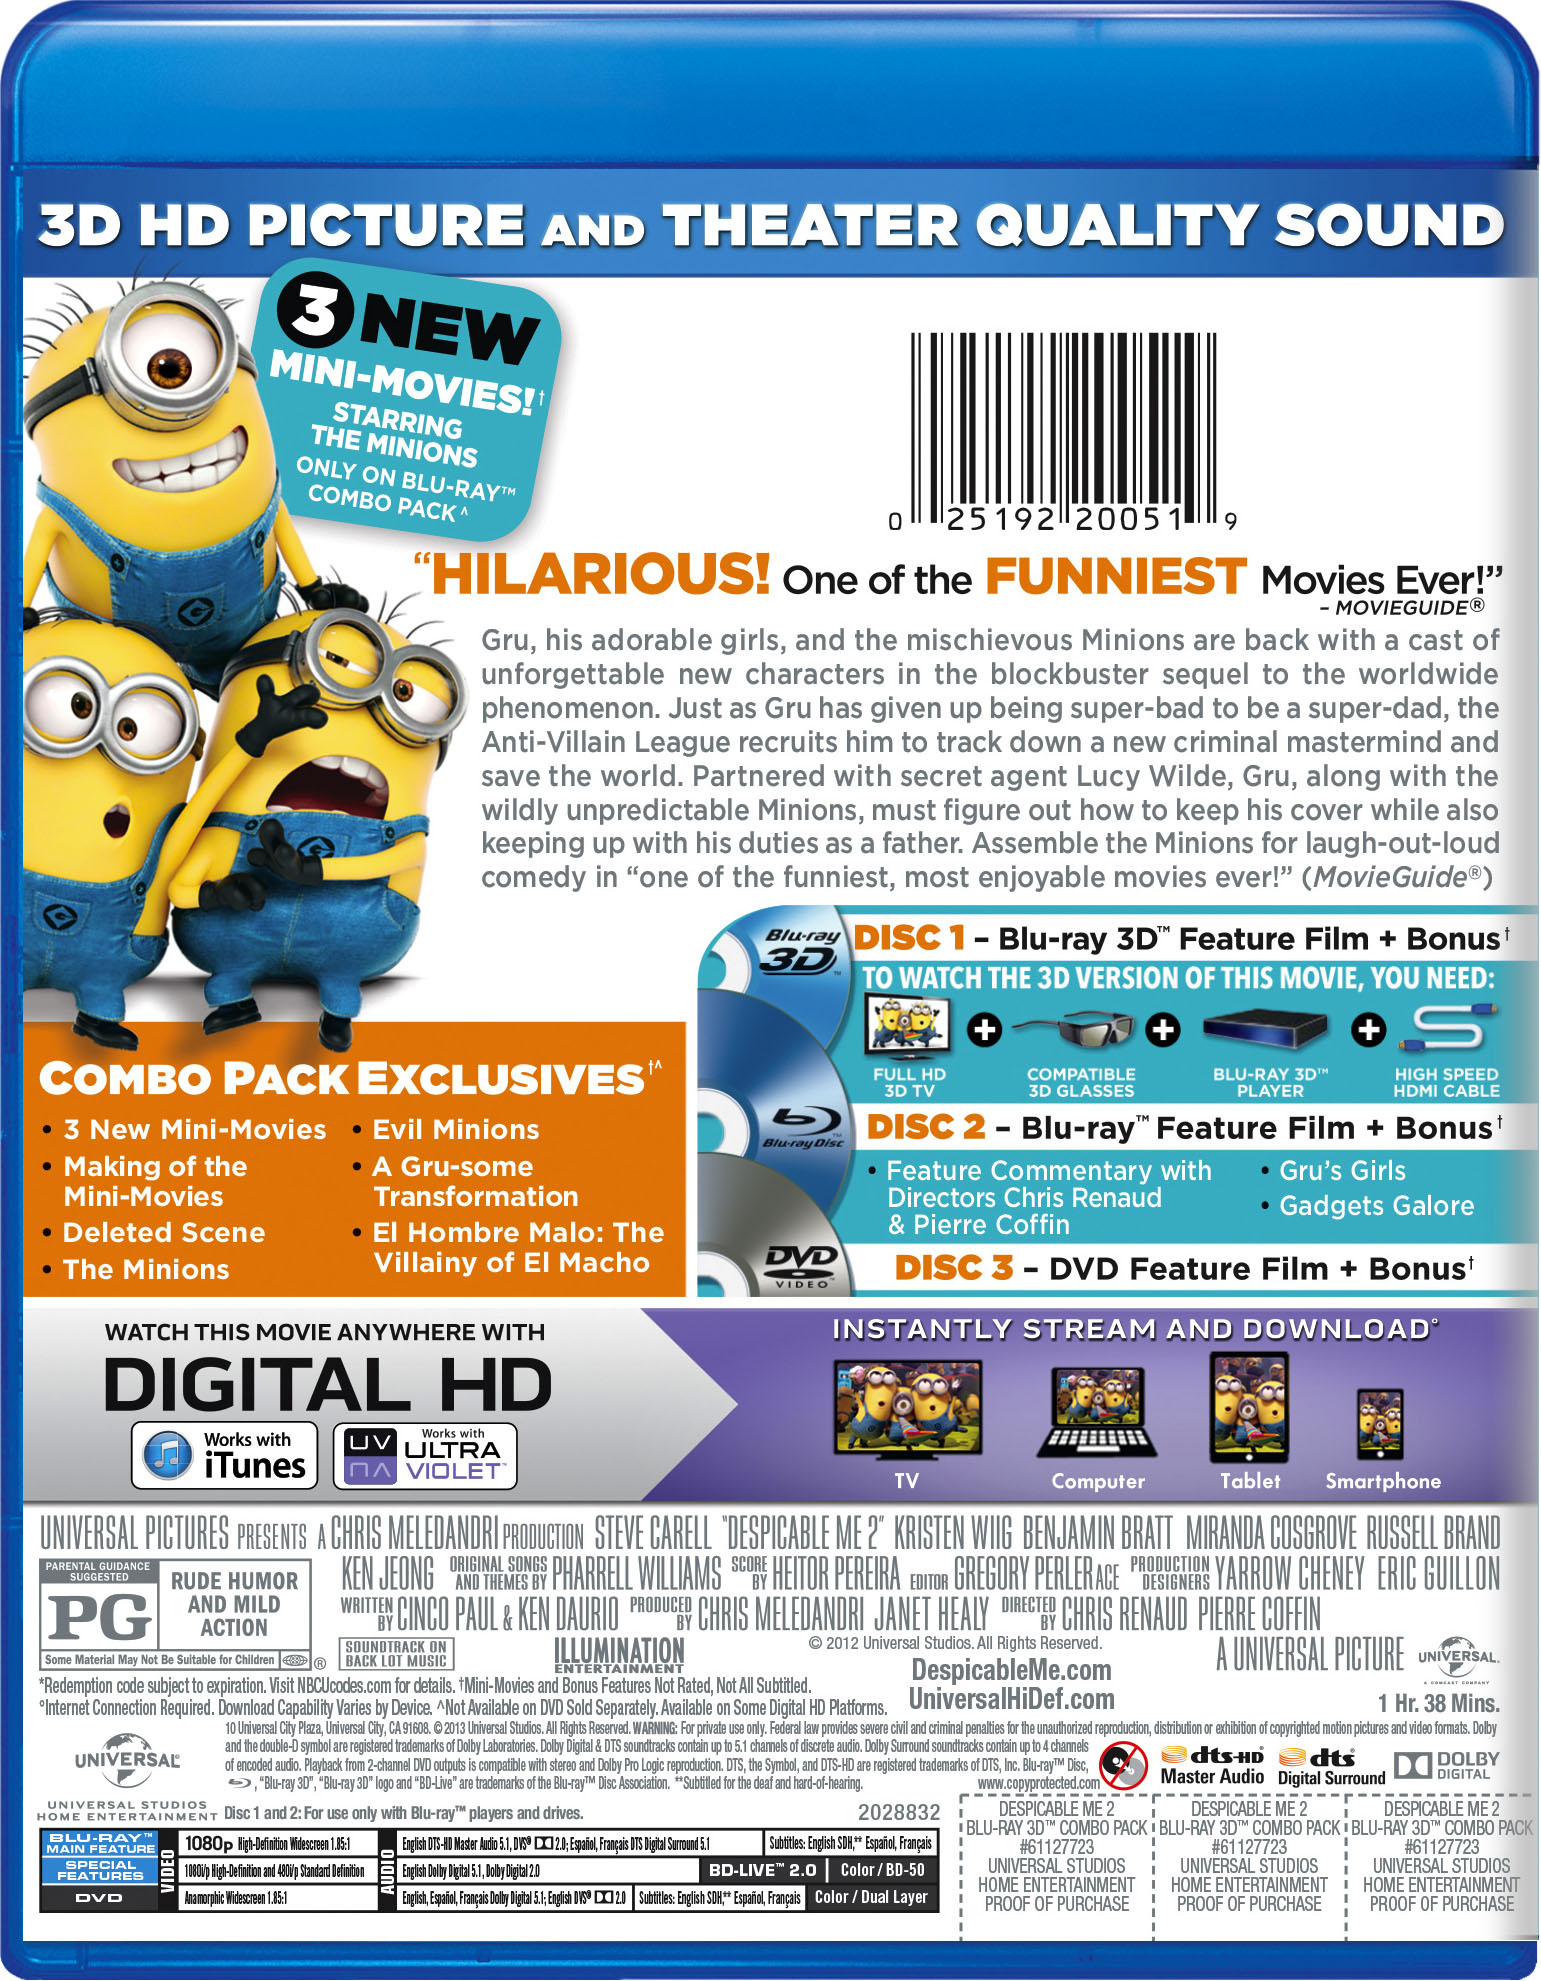 Despicable me 3 download torrent file free